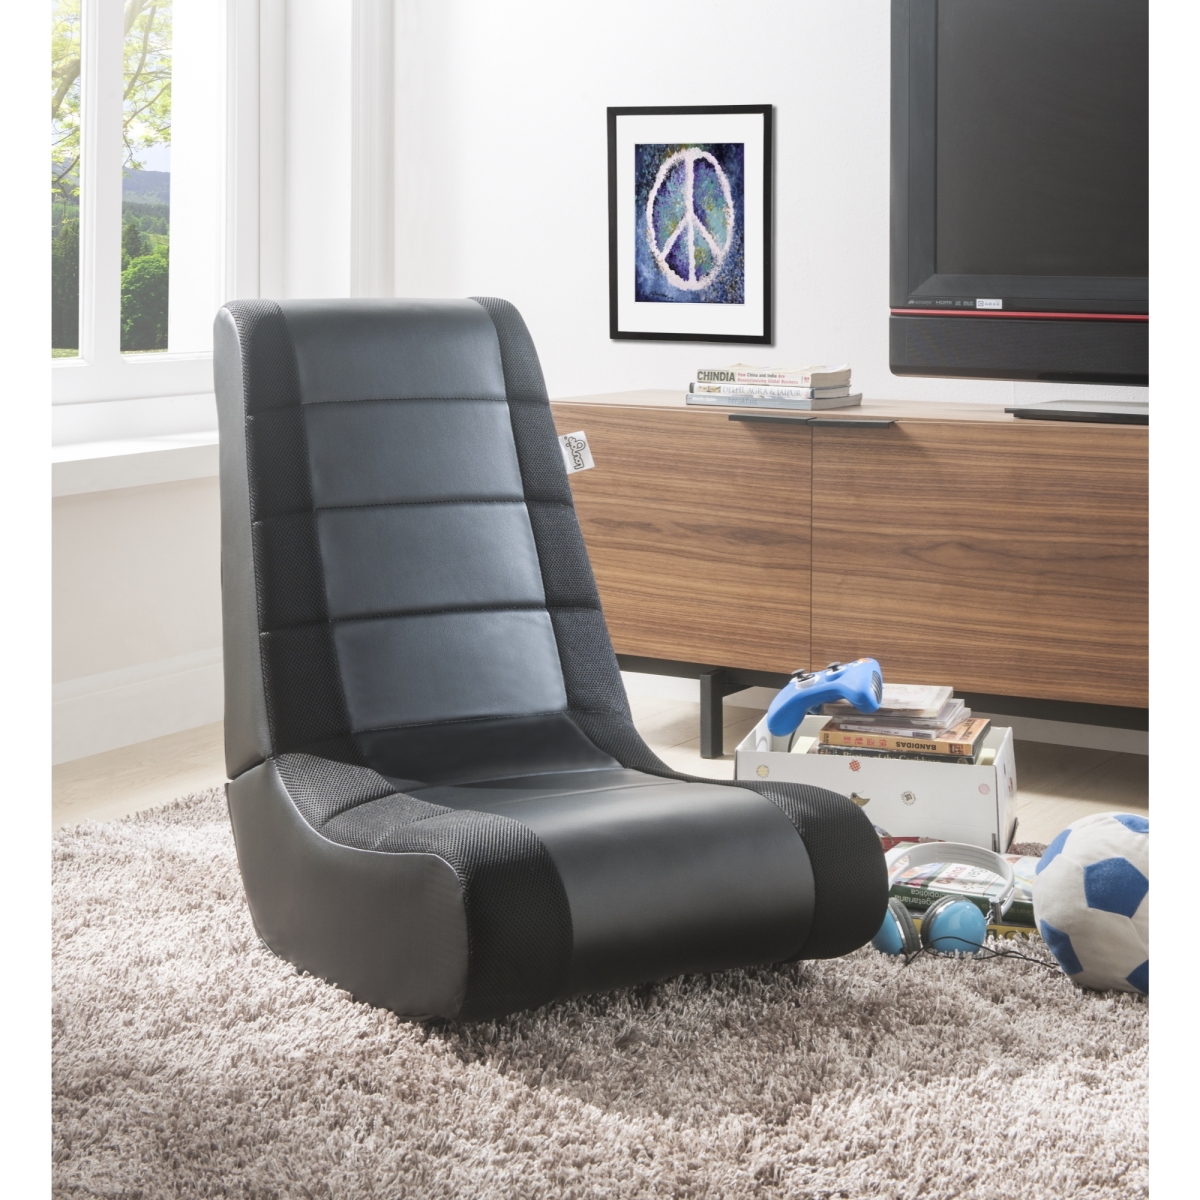 Rockme Video Gaming Rocker Chair For Kids Teens Adults & Boys Or Girls - Black With Black